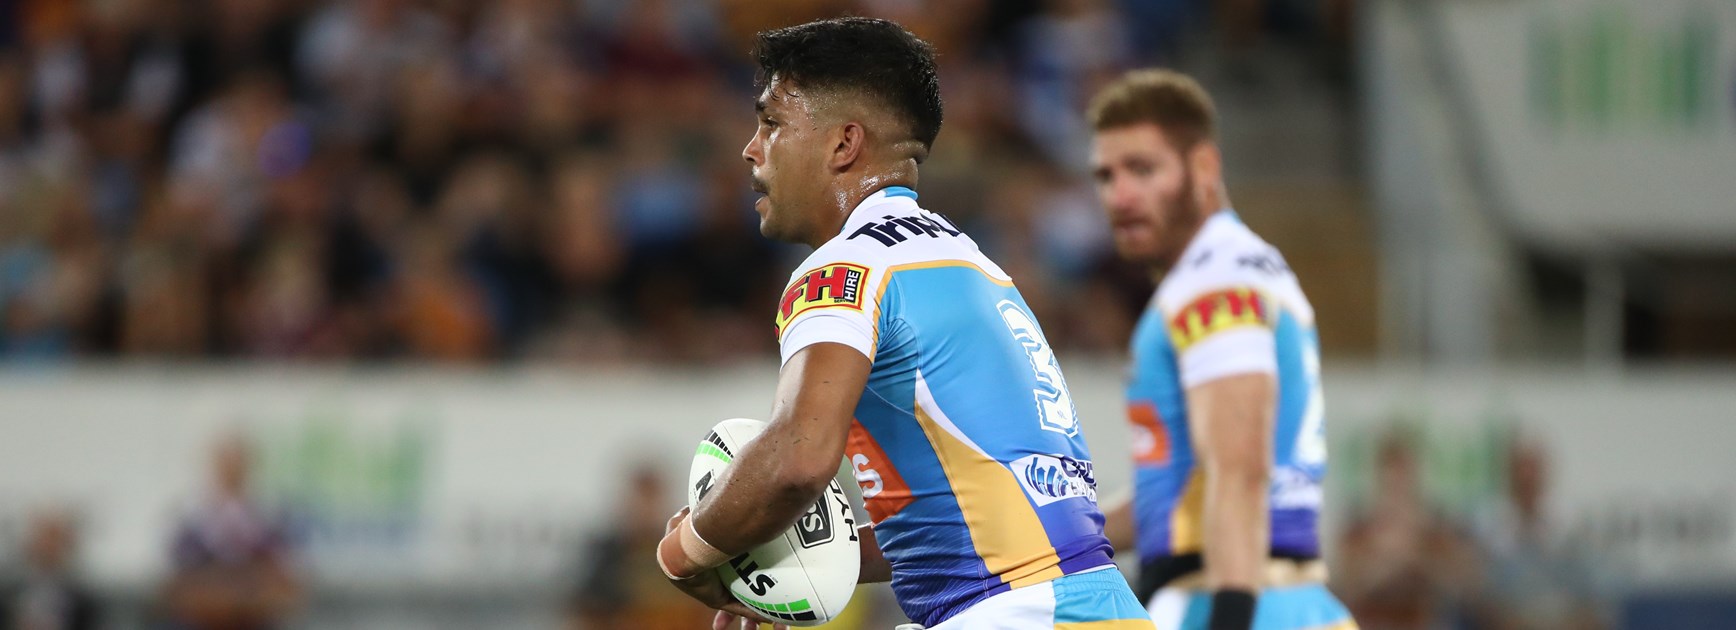 Gold Coast to hit Raiders with offensive blitz